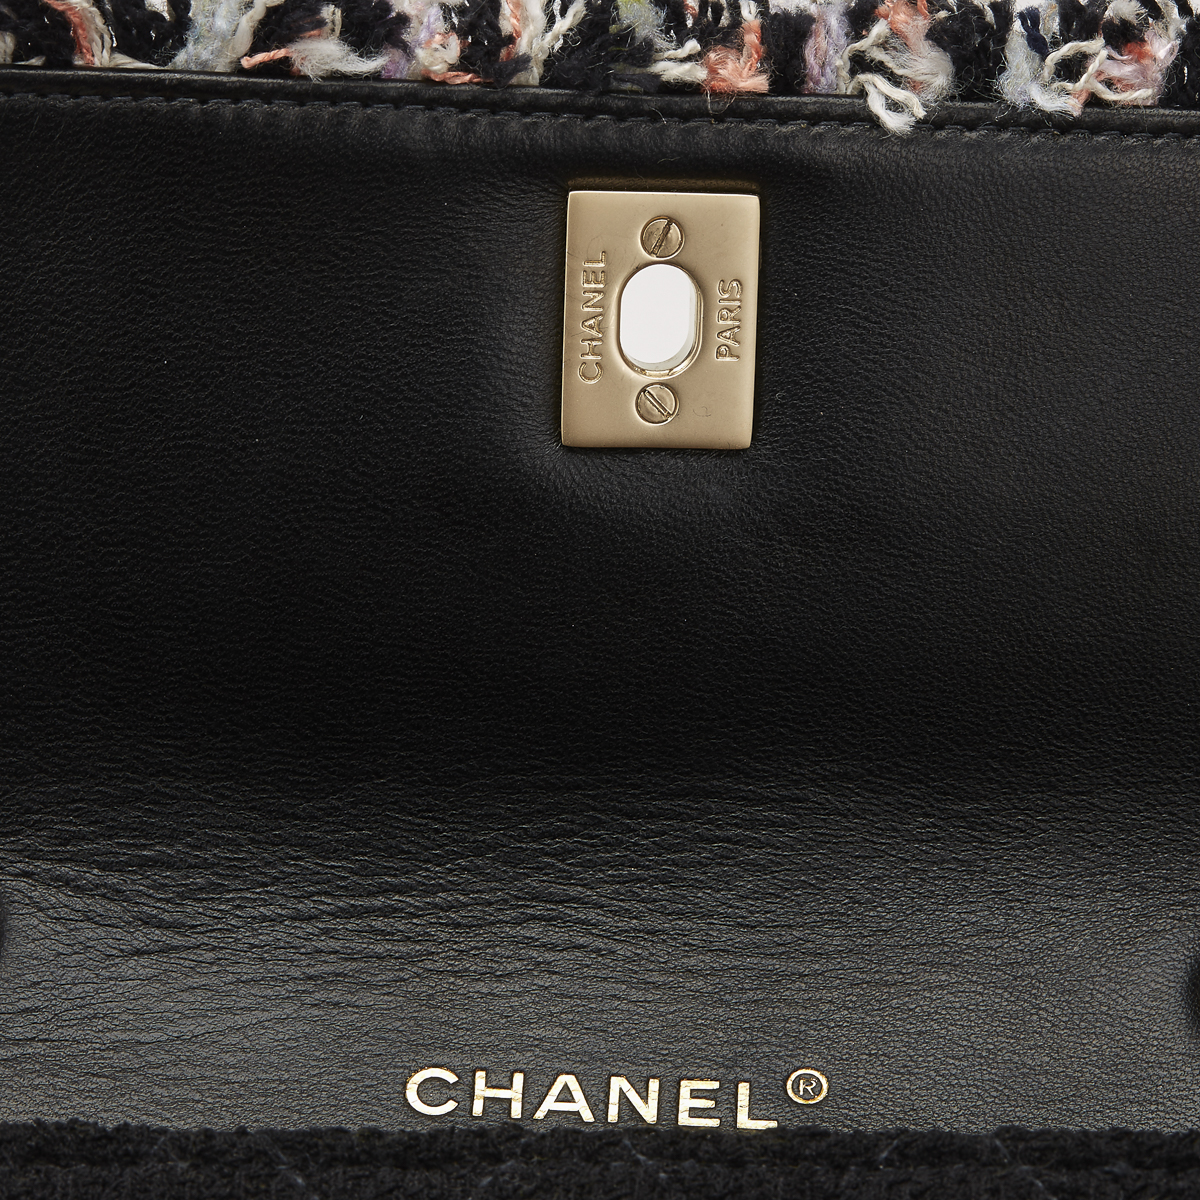 CHANEL East West Classic Single Flap Bag - Image 8 of 10